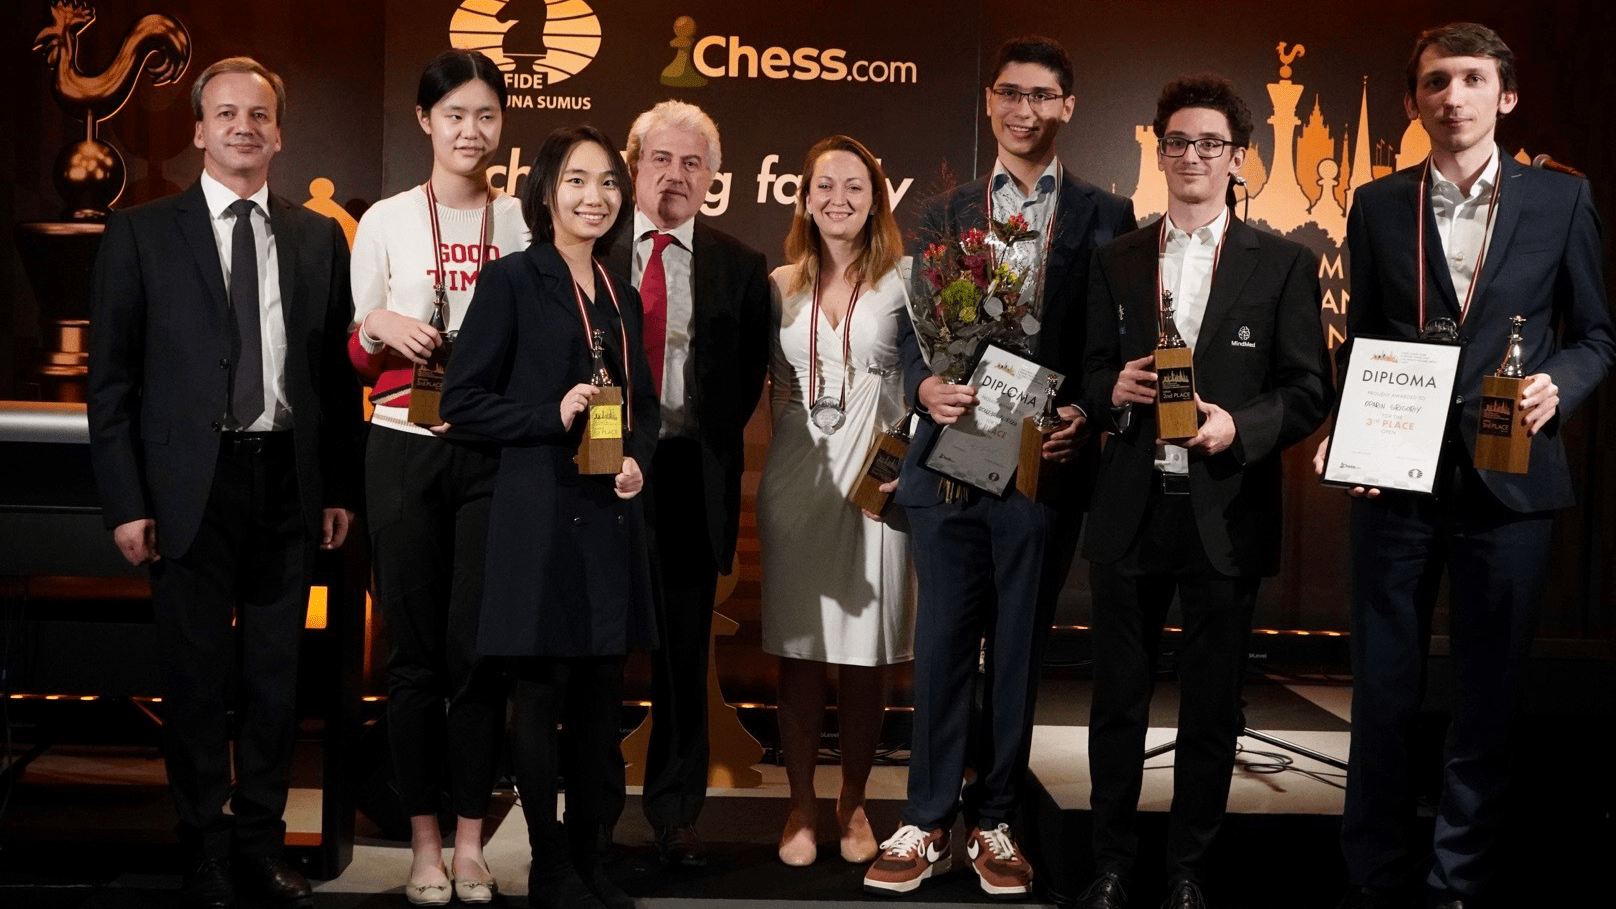 Grand Chess Tour on X: Alireza Firouzja wins again in the European Team  Championship and is now ranked number 3 in the world on the live rating  list, ahead of Caruana and